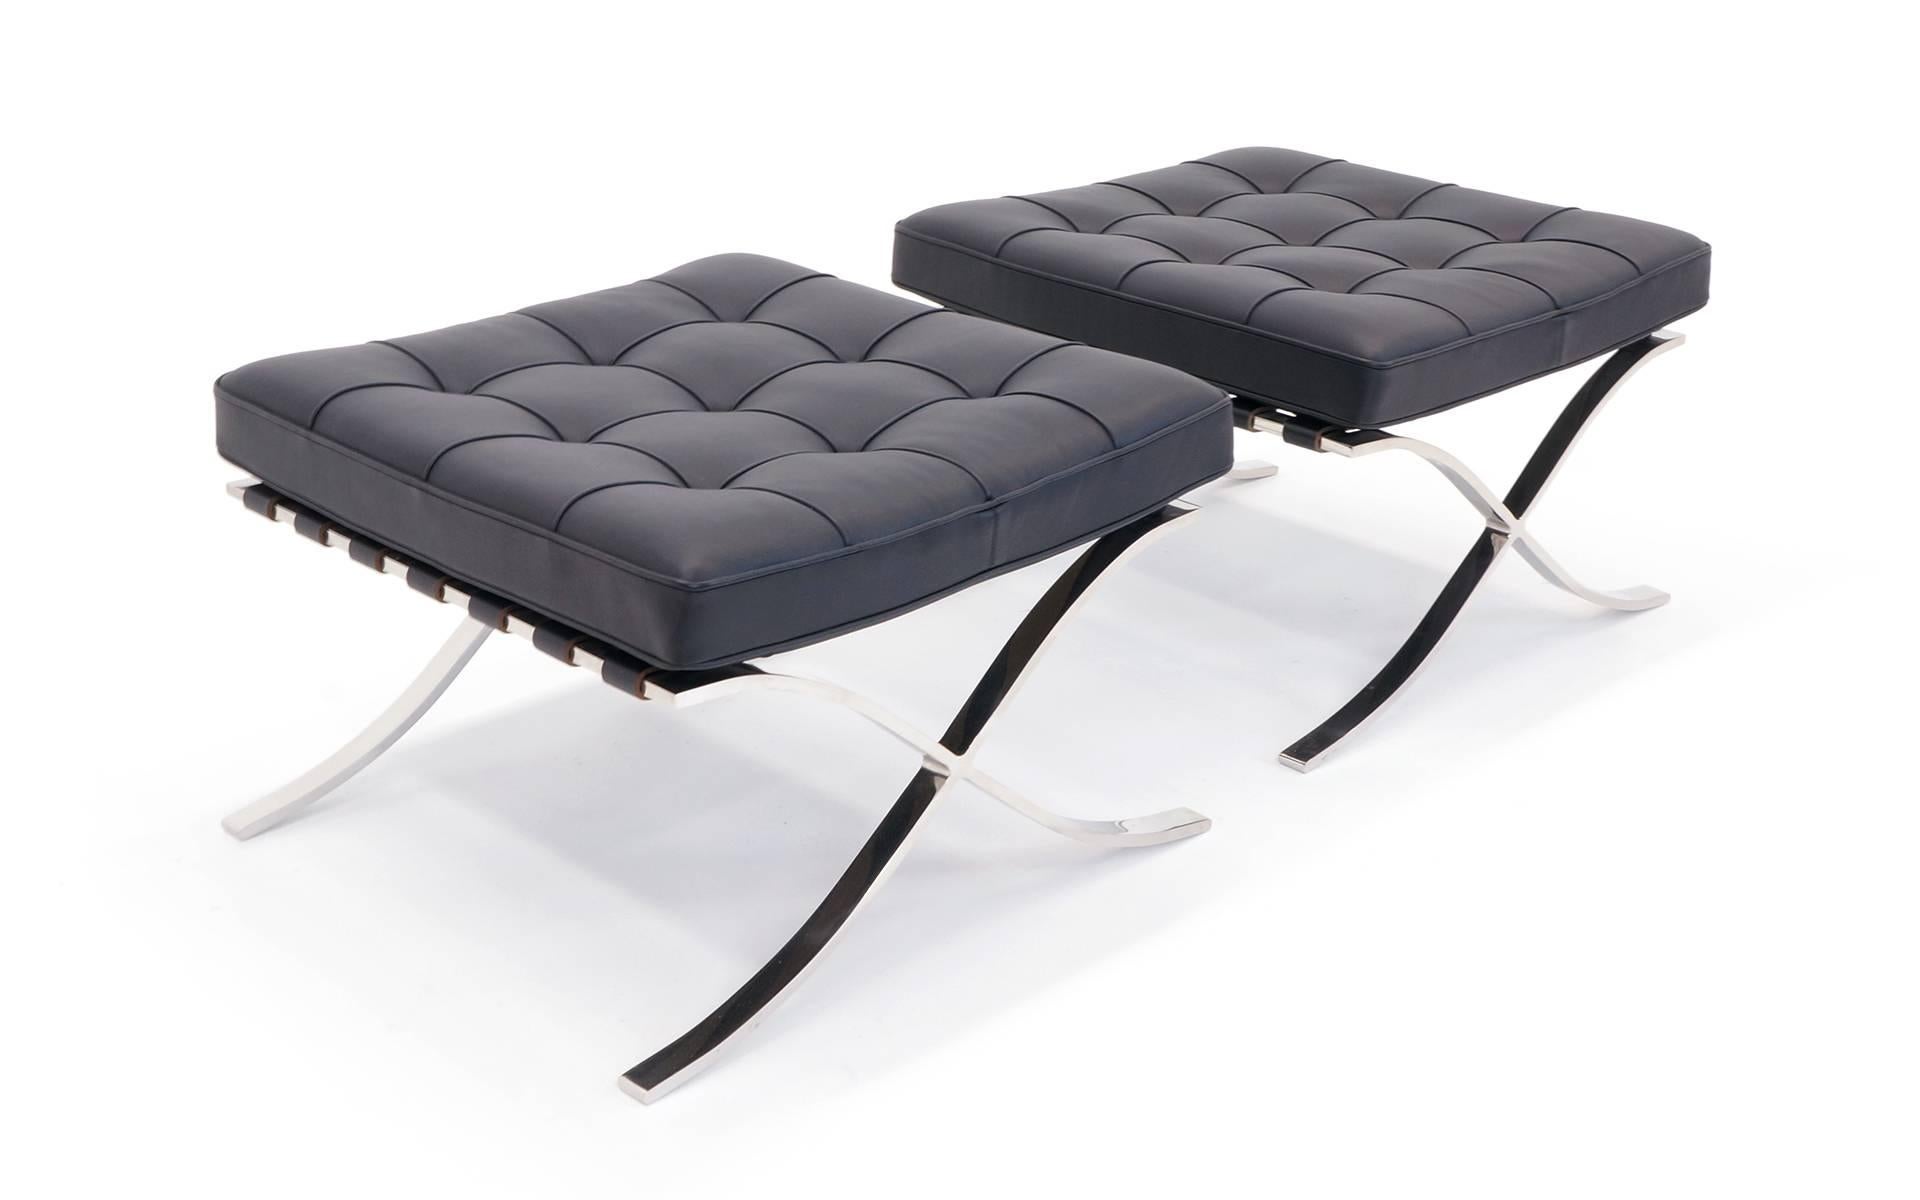 Virtually mint condition pair of Knoll Barcelona ottomans. These are the more expensive solid stainless steel (not chromed steel) version that costs about $10,000 for a new pair.  Use as an ottoman stool or bench. Classic black leather.  Signed with